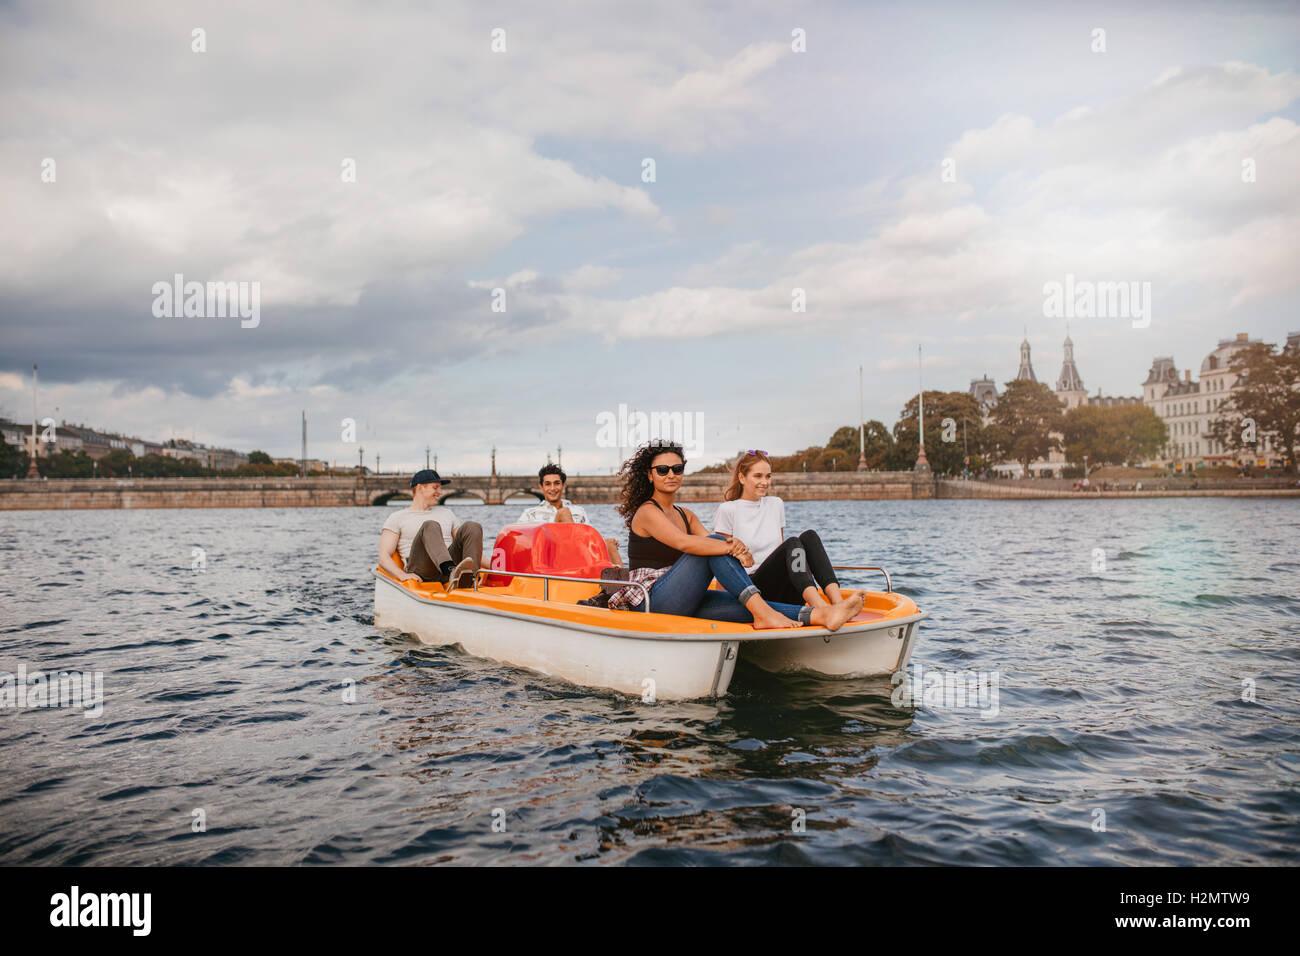 Shot of four young people on pedal boat in lake. Women sitting on front with men at back pedaling the boat. Stock Photo